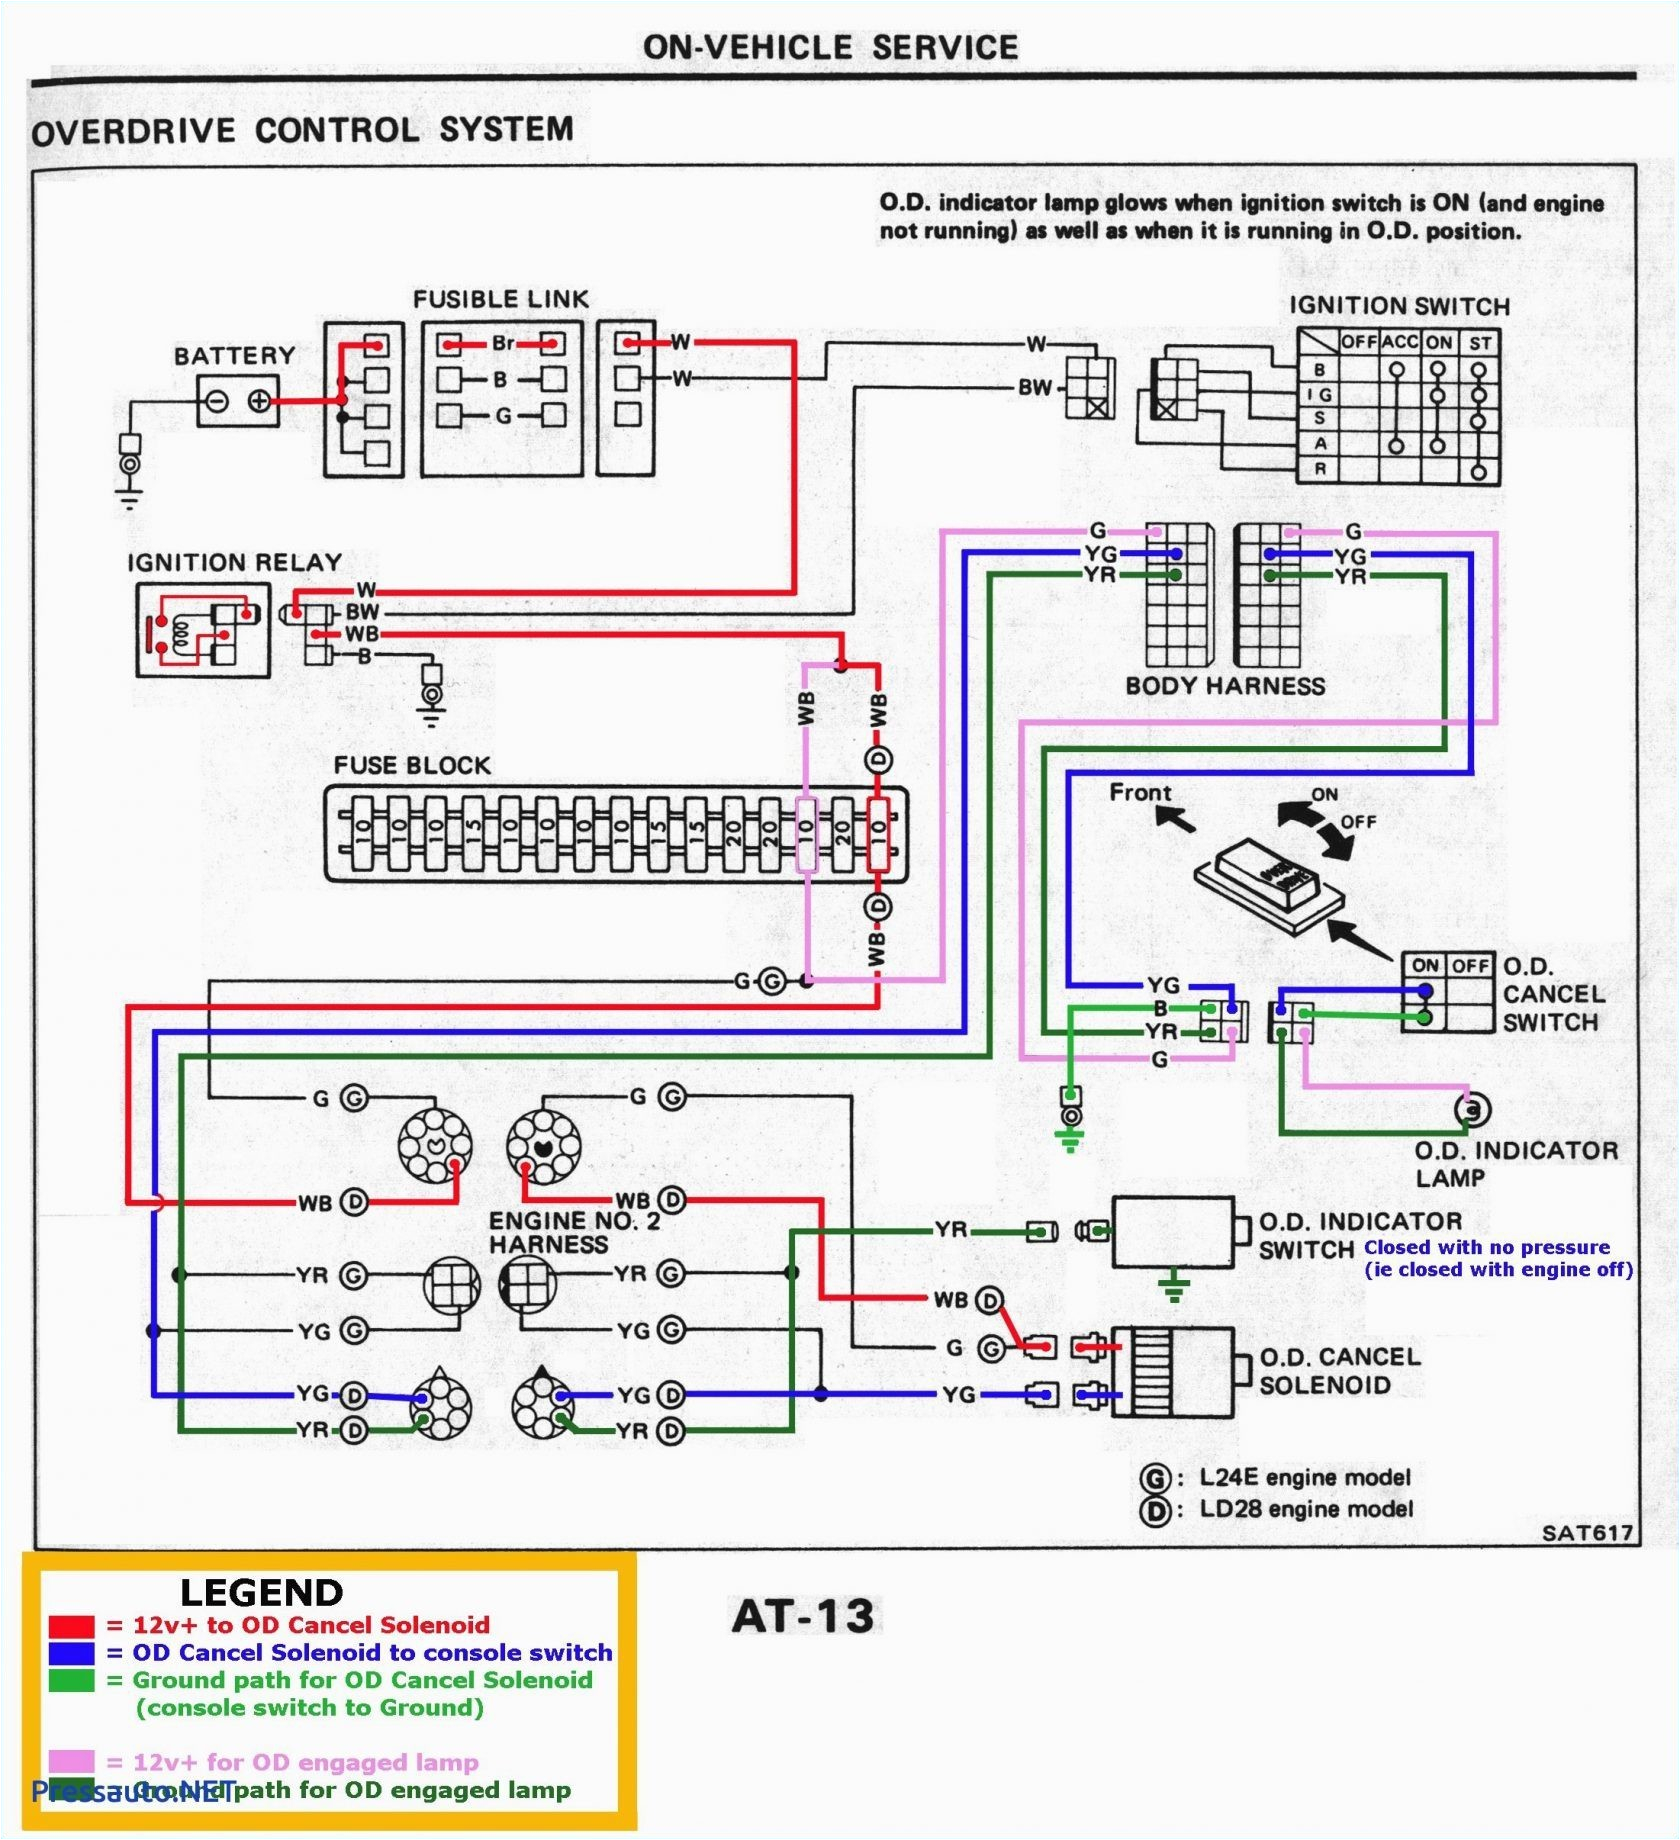 dl1056 wiring diagram wiring diagram view wiring diagram moreover ao smith blower motor wiring as well century